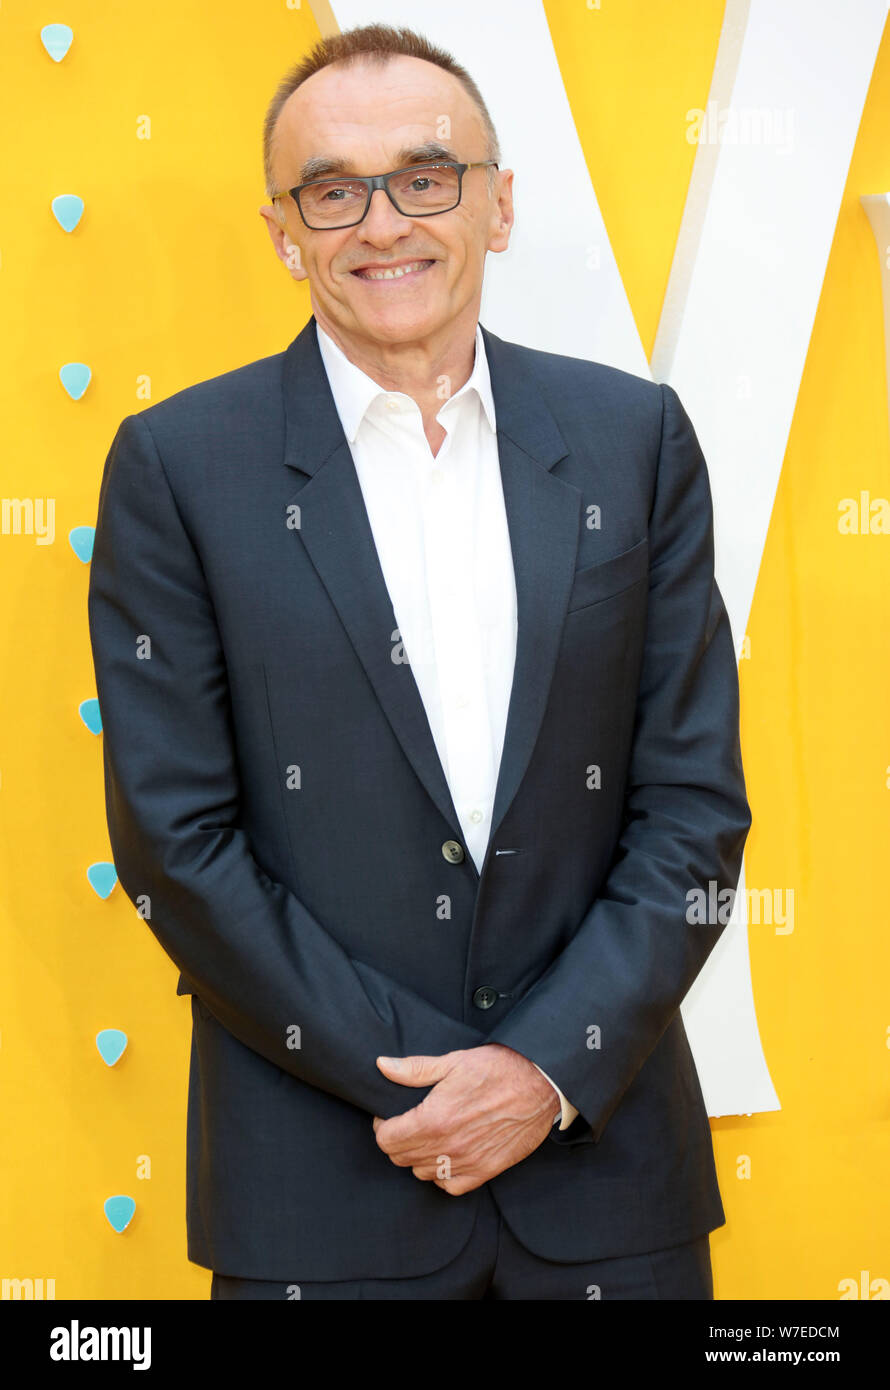 Jun 18, 2019 - London, England, UK - Danny Boyle attending Yesterday UK film premiere, Odeon Luxe, Leicester Square Stock Photo